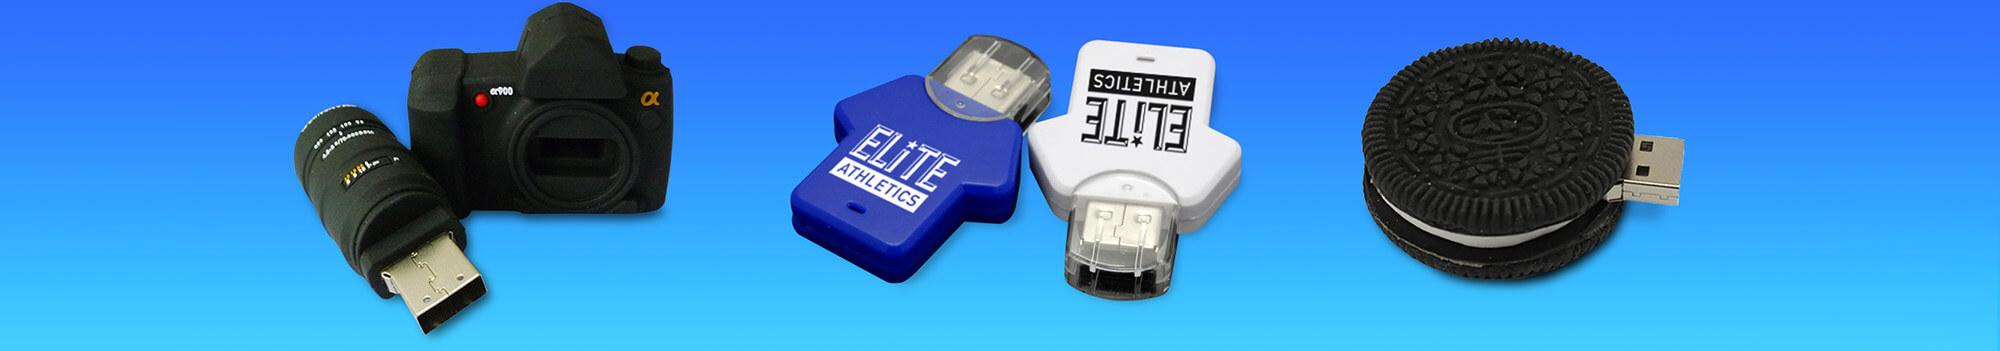 Custom 3D Flash Drive styles and shapes